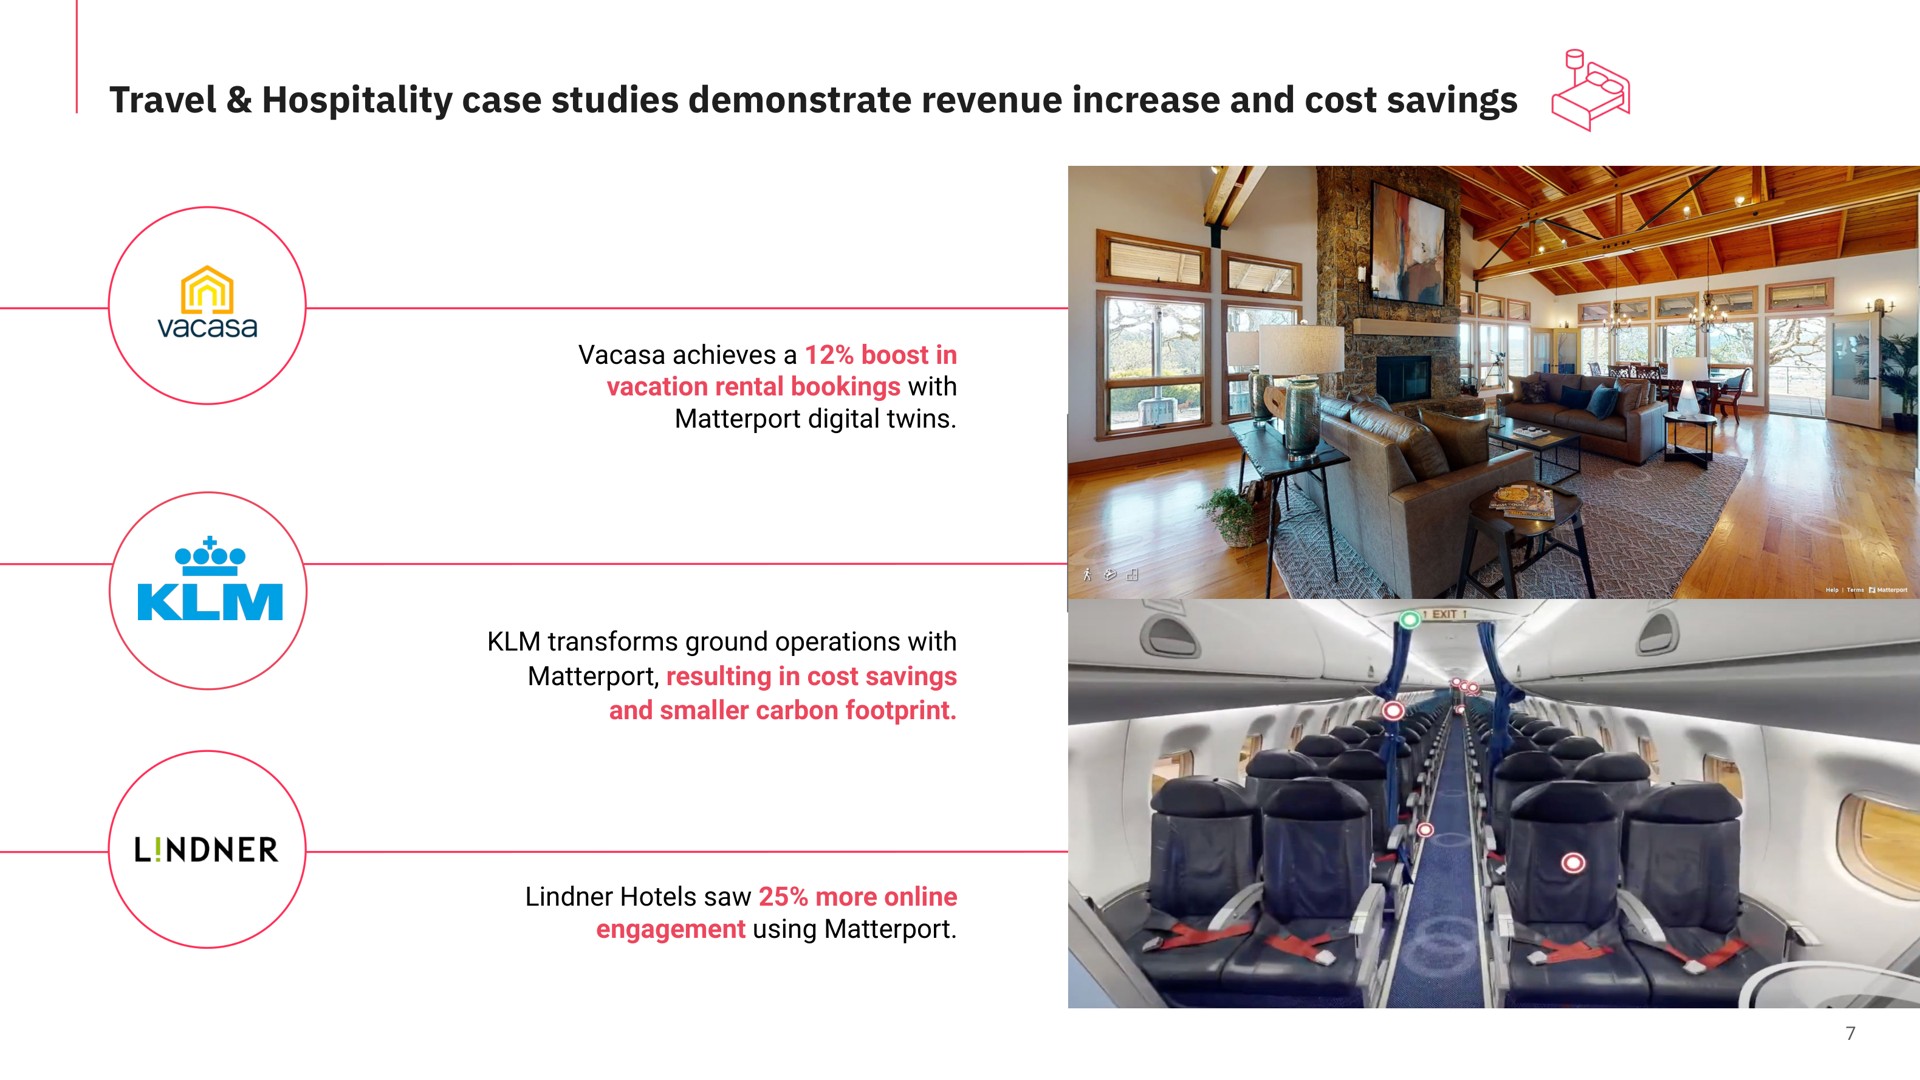 travel hospitality case studies demonstrate revenue increase and cost savings | Matterport